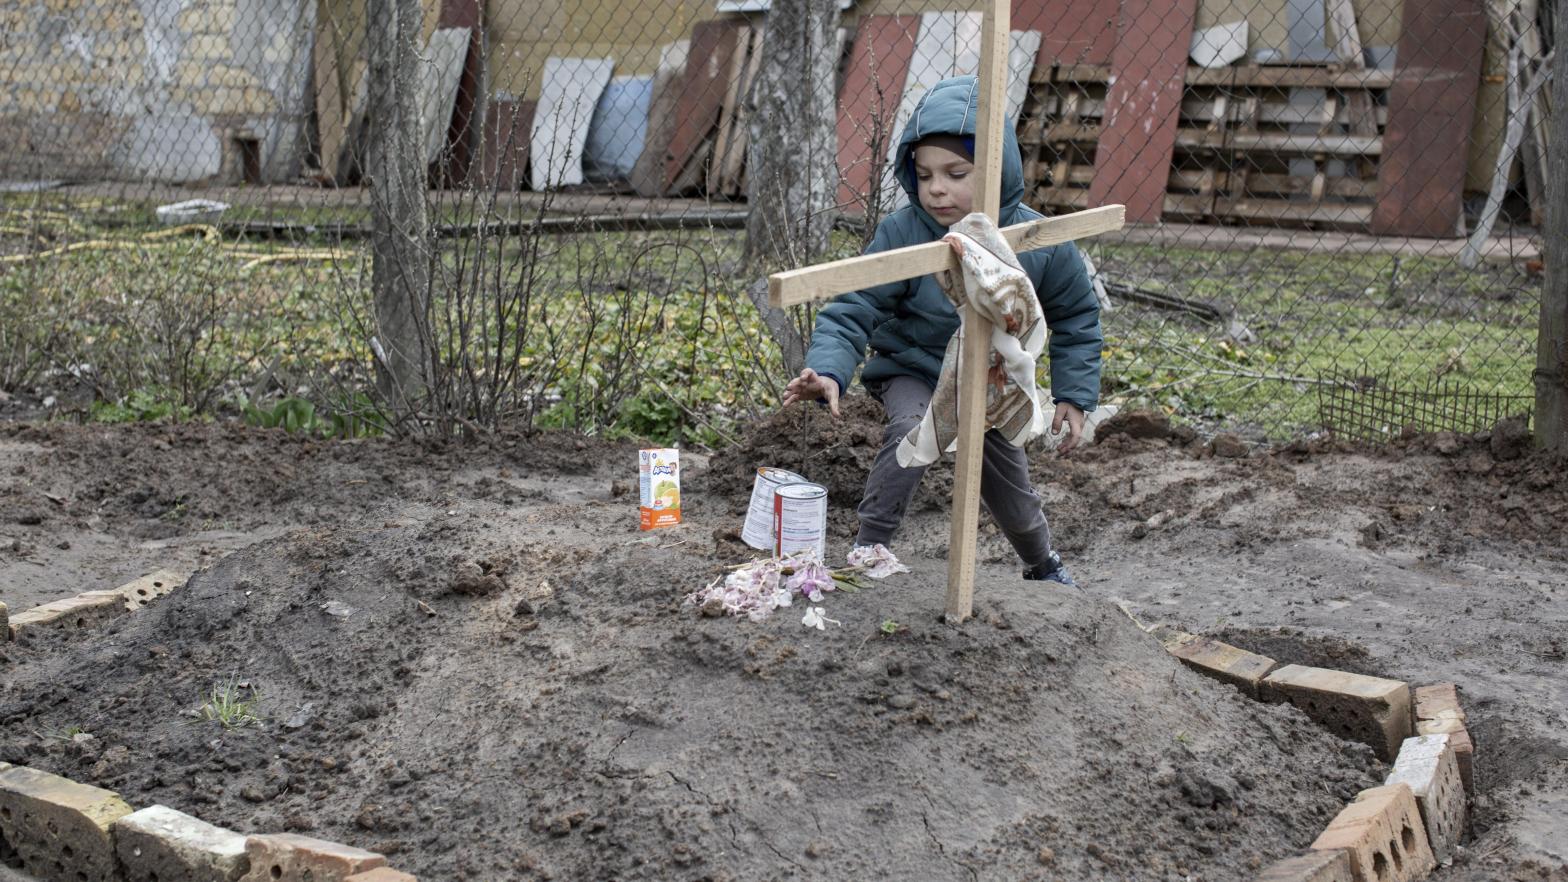 A young kid gives an offering of food to the grave of a woman in the town of Bucha, on the outskirts of Kyiv, on April 4, 2022. (Photo: Narciso Contreras/Anadolu Agency, Getty Images)